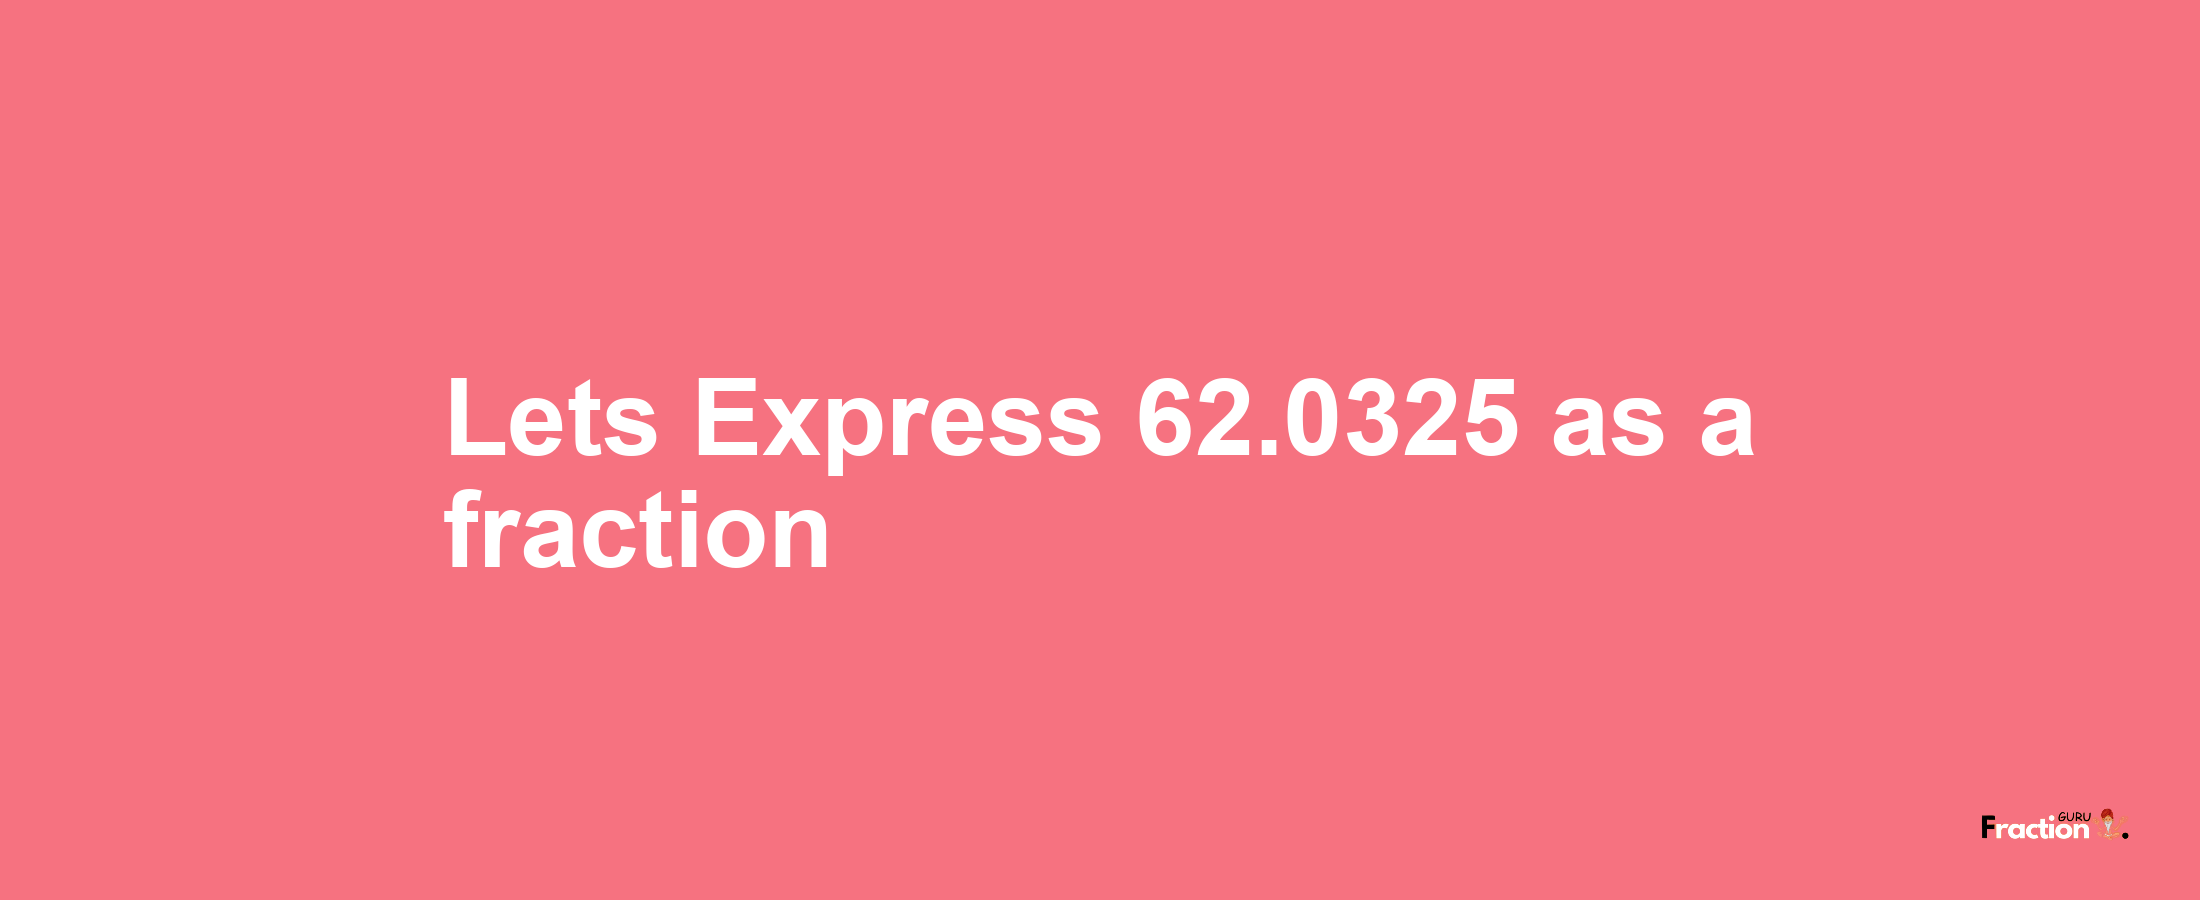 Lets Express 62.0325 as afraction